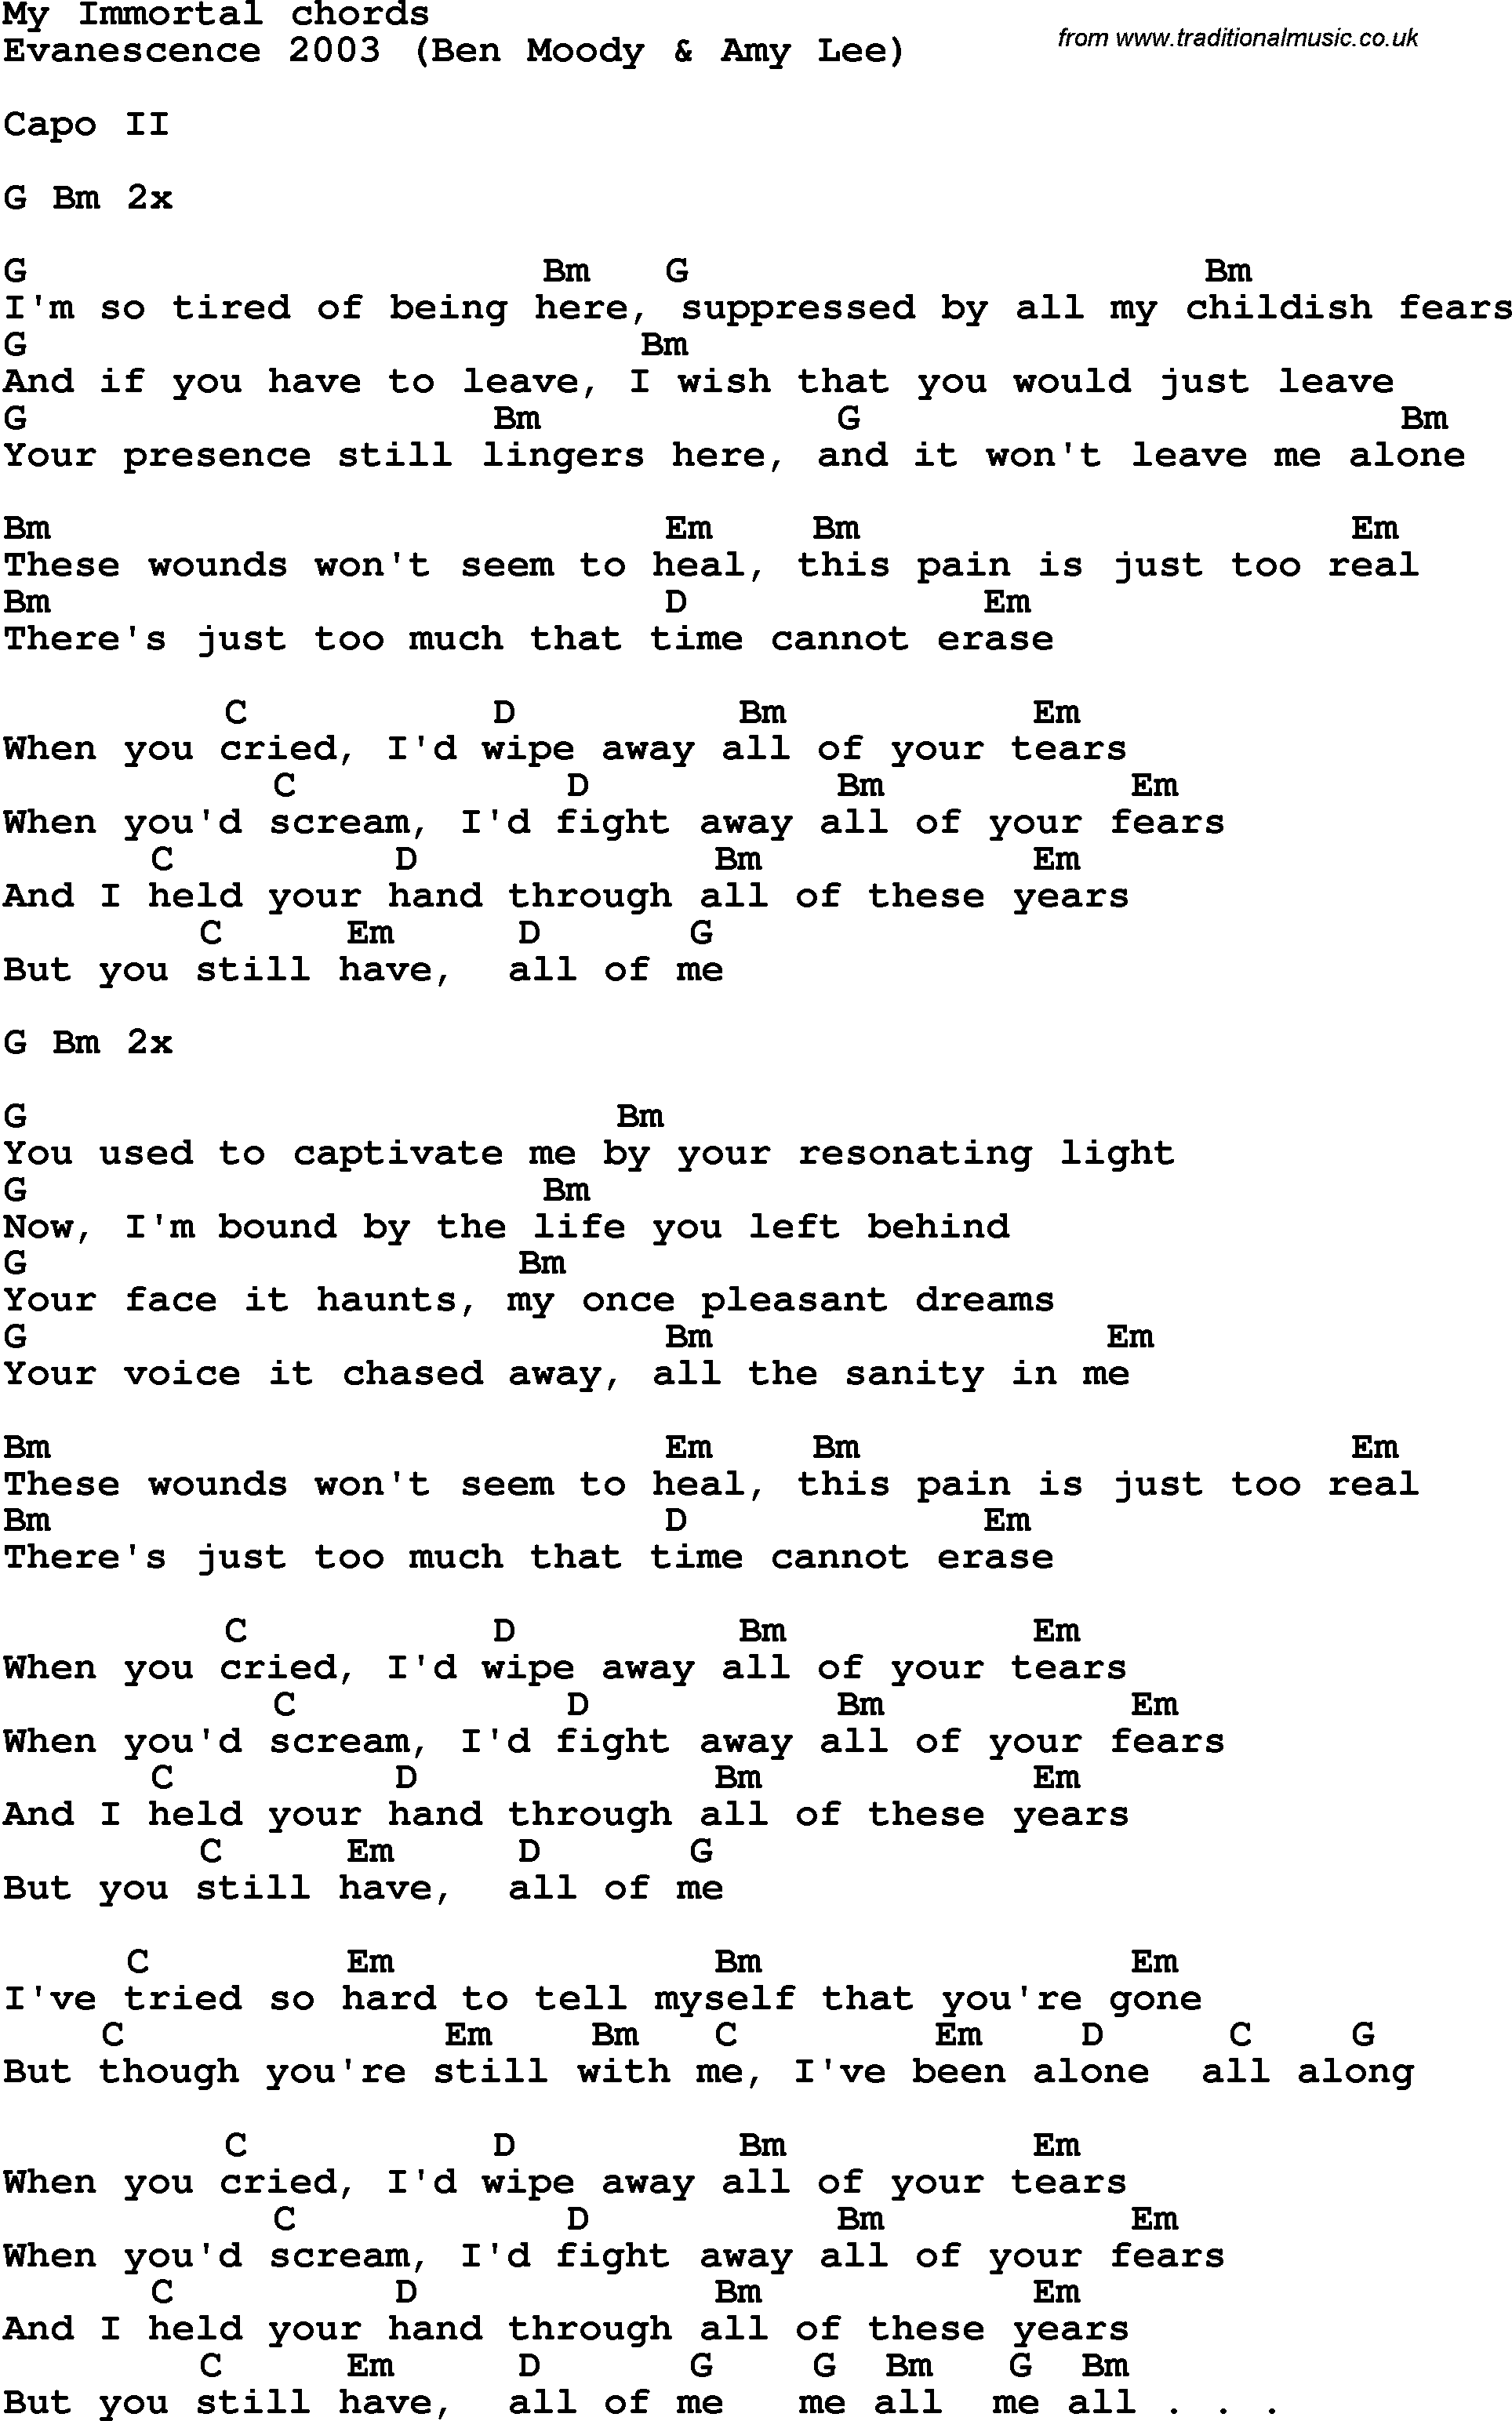 Song Lyrics with guitar chords for My Immortal